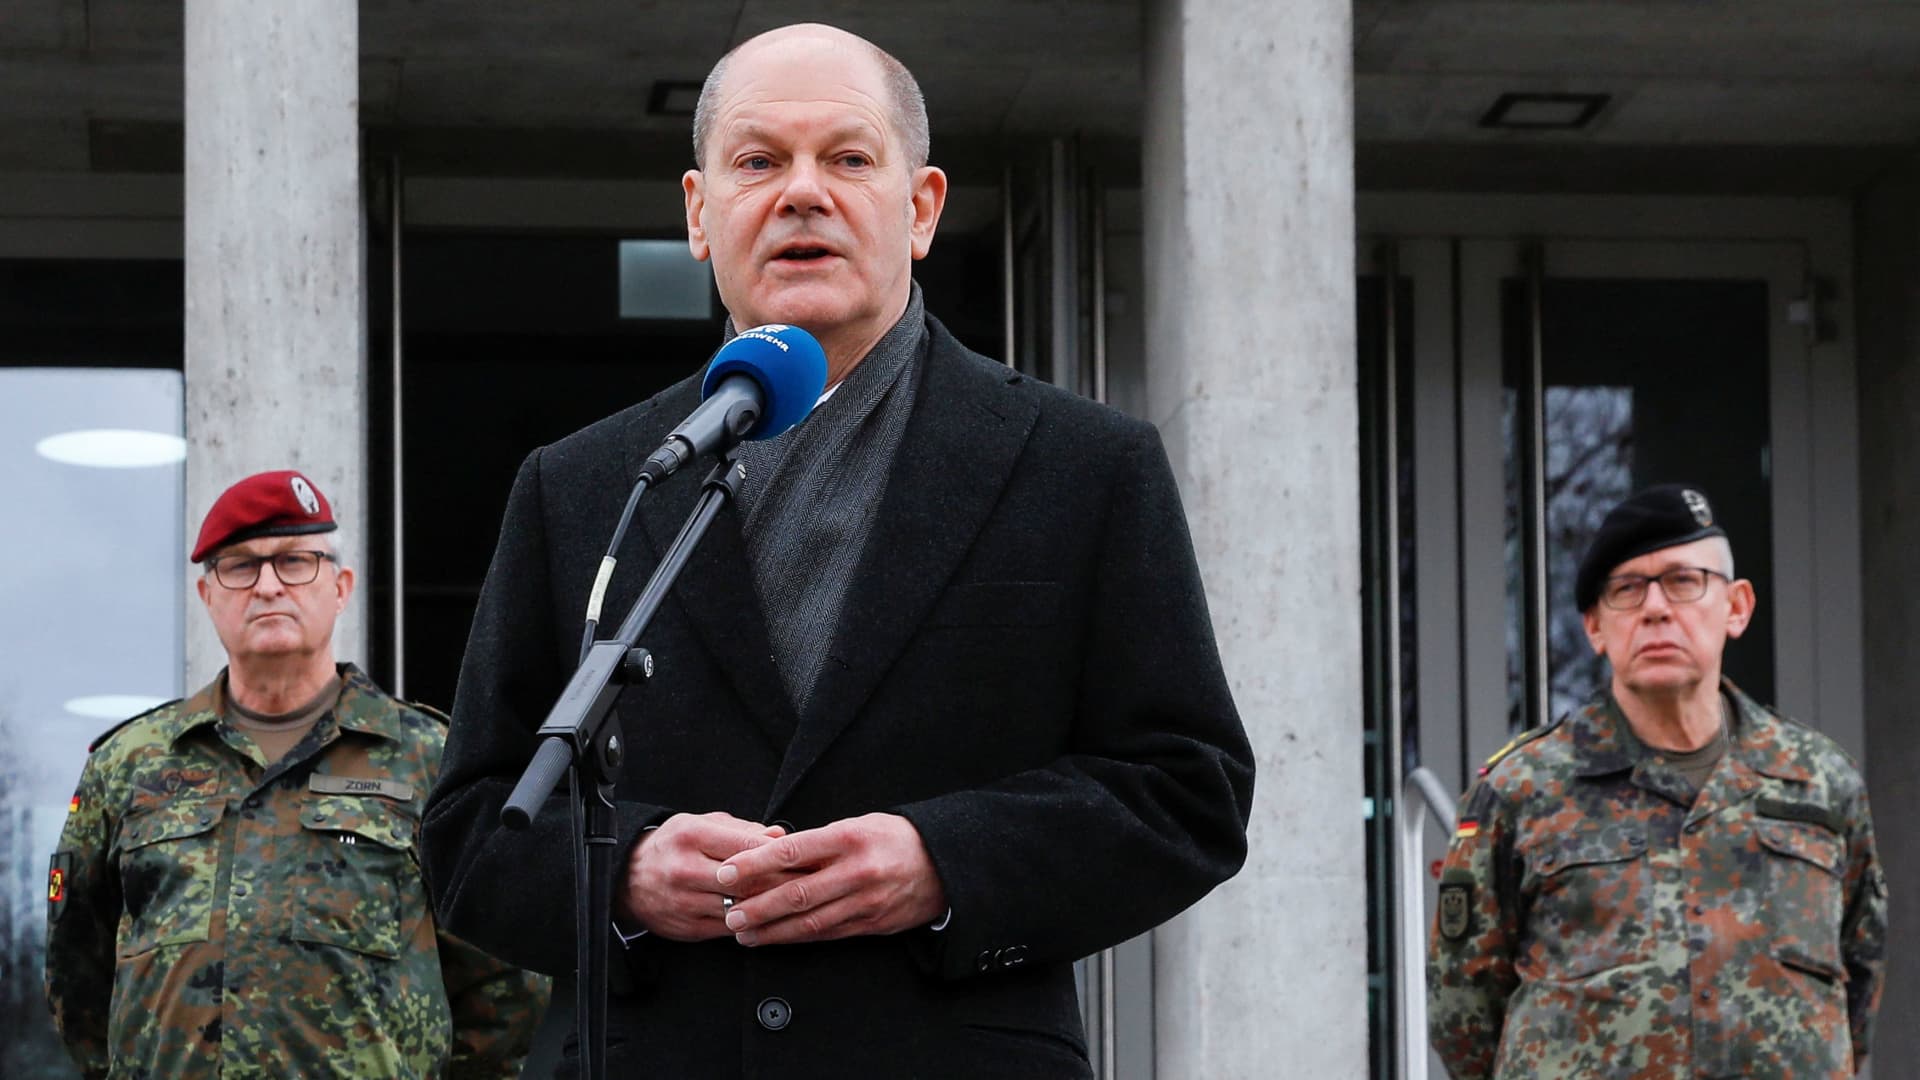 German Chancellor Olaf Scholz speaks during his visit at the German Army Operations Command in Schwielowsee, Germany March 4, 2022.